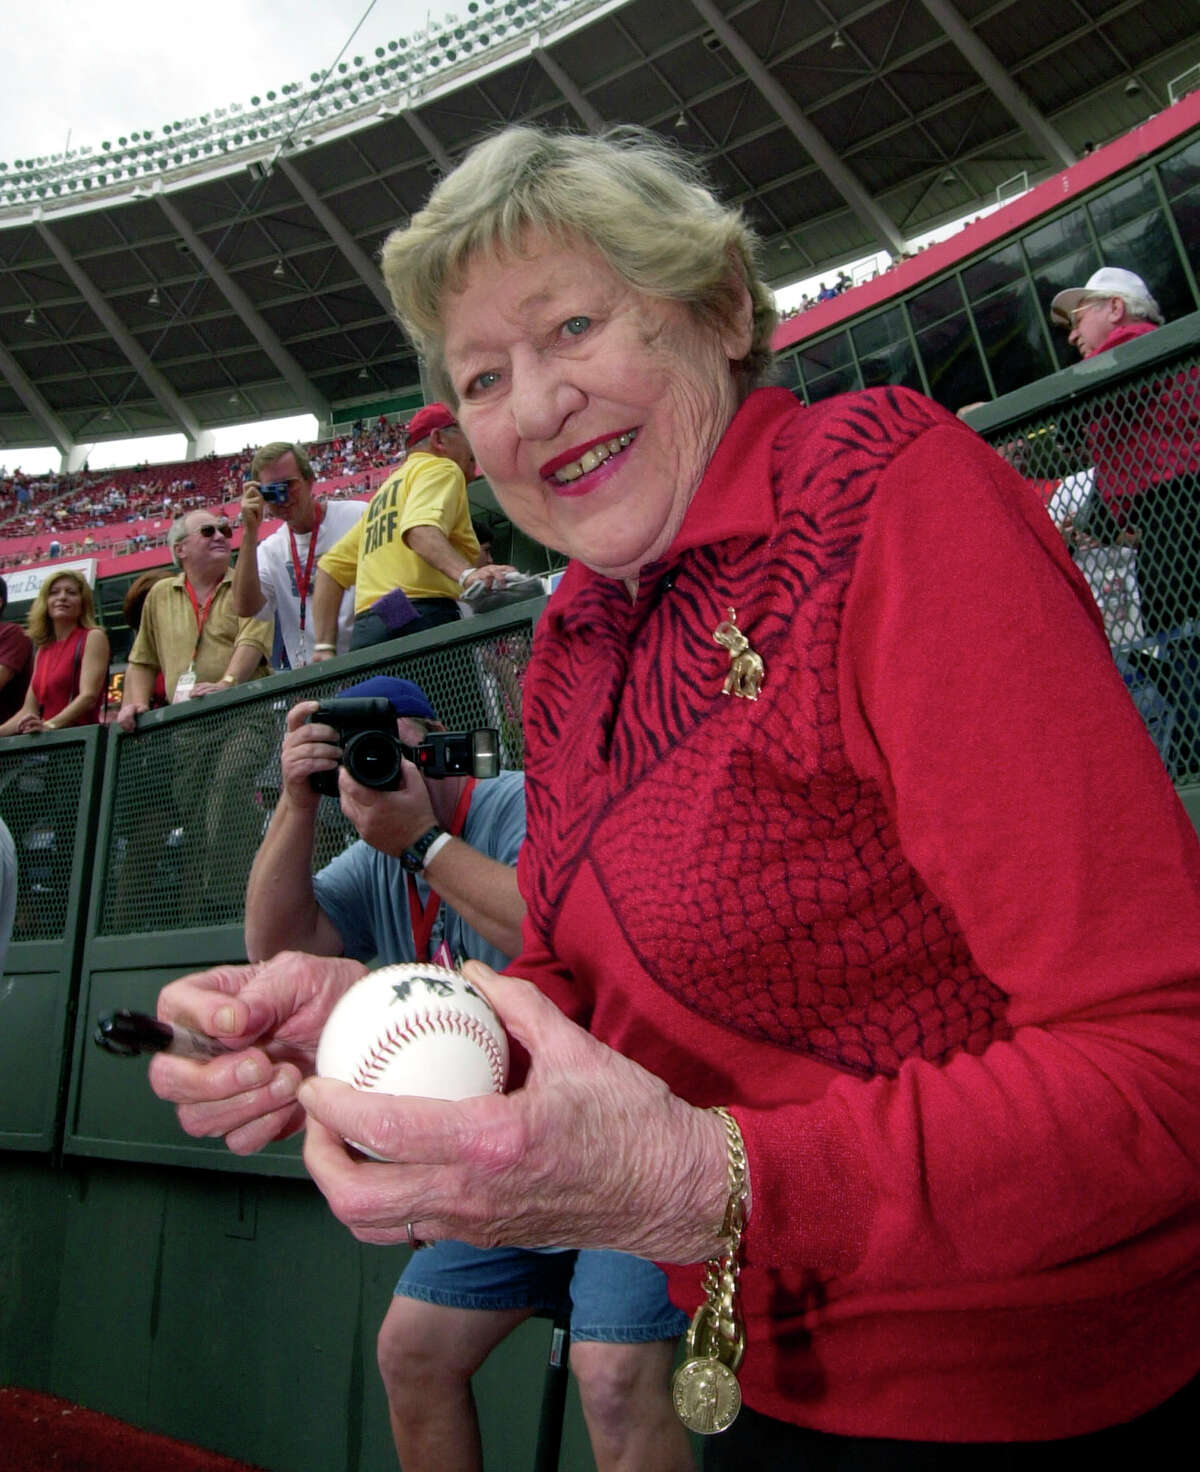 FILE - In this Sept. 22, 2002 file photo former Cincinnati Reds majority owner Marge Schott signs autographs prior to the final game at Cinergy Field in Cincinnati. Schott was a divisive figure when she owned the Cincinnati Reds, getting suspended and ultimately forced out for her racially offensive language. The community is debating what to do with facilities named in her memory. (AP Photo/David Kohl, file)